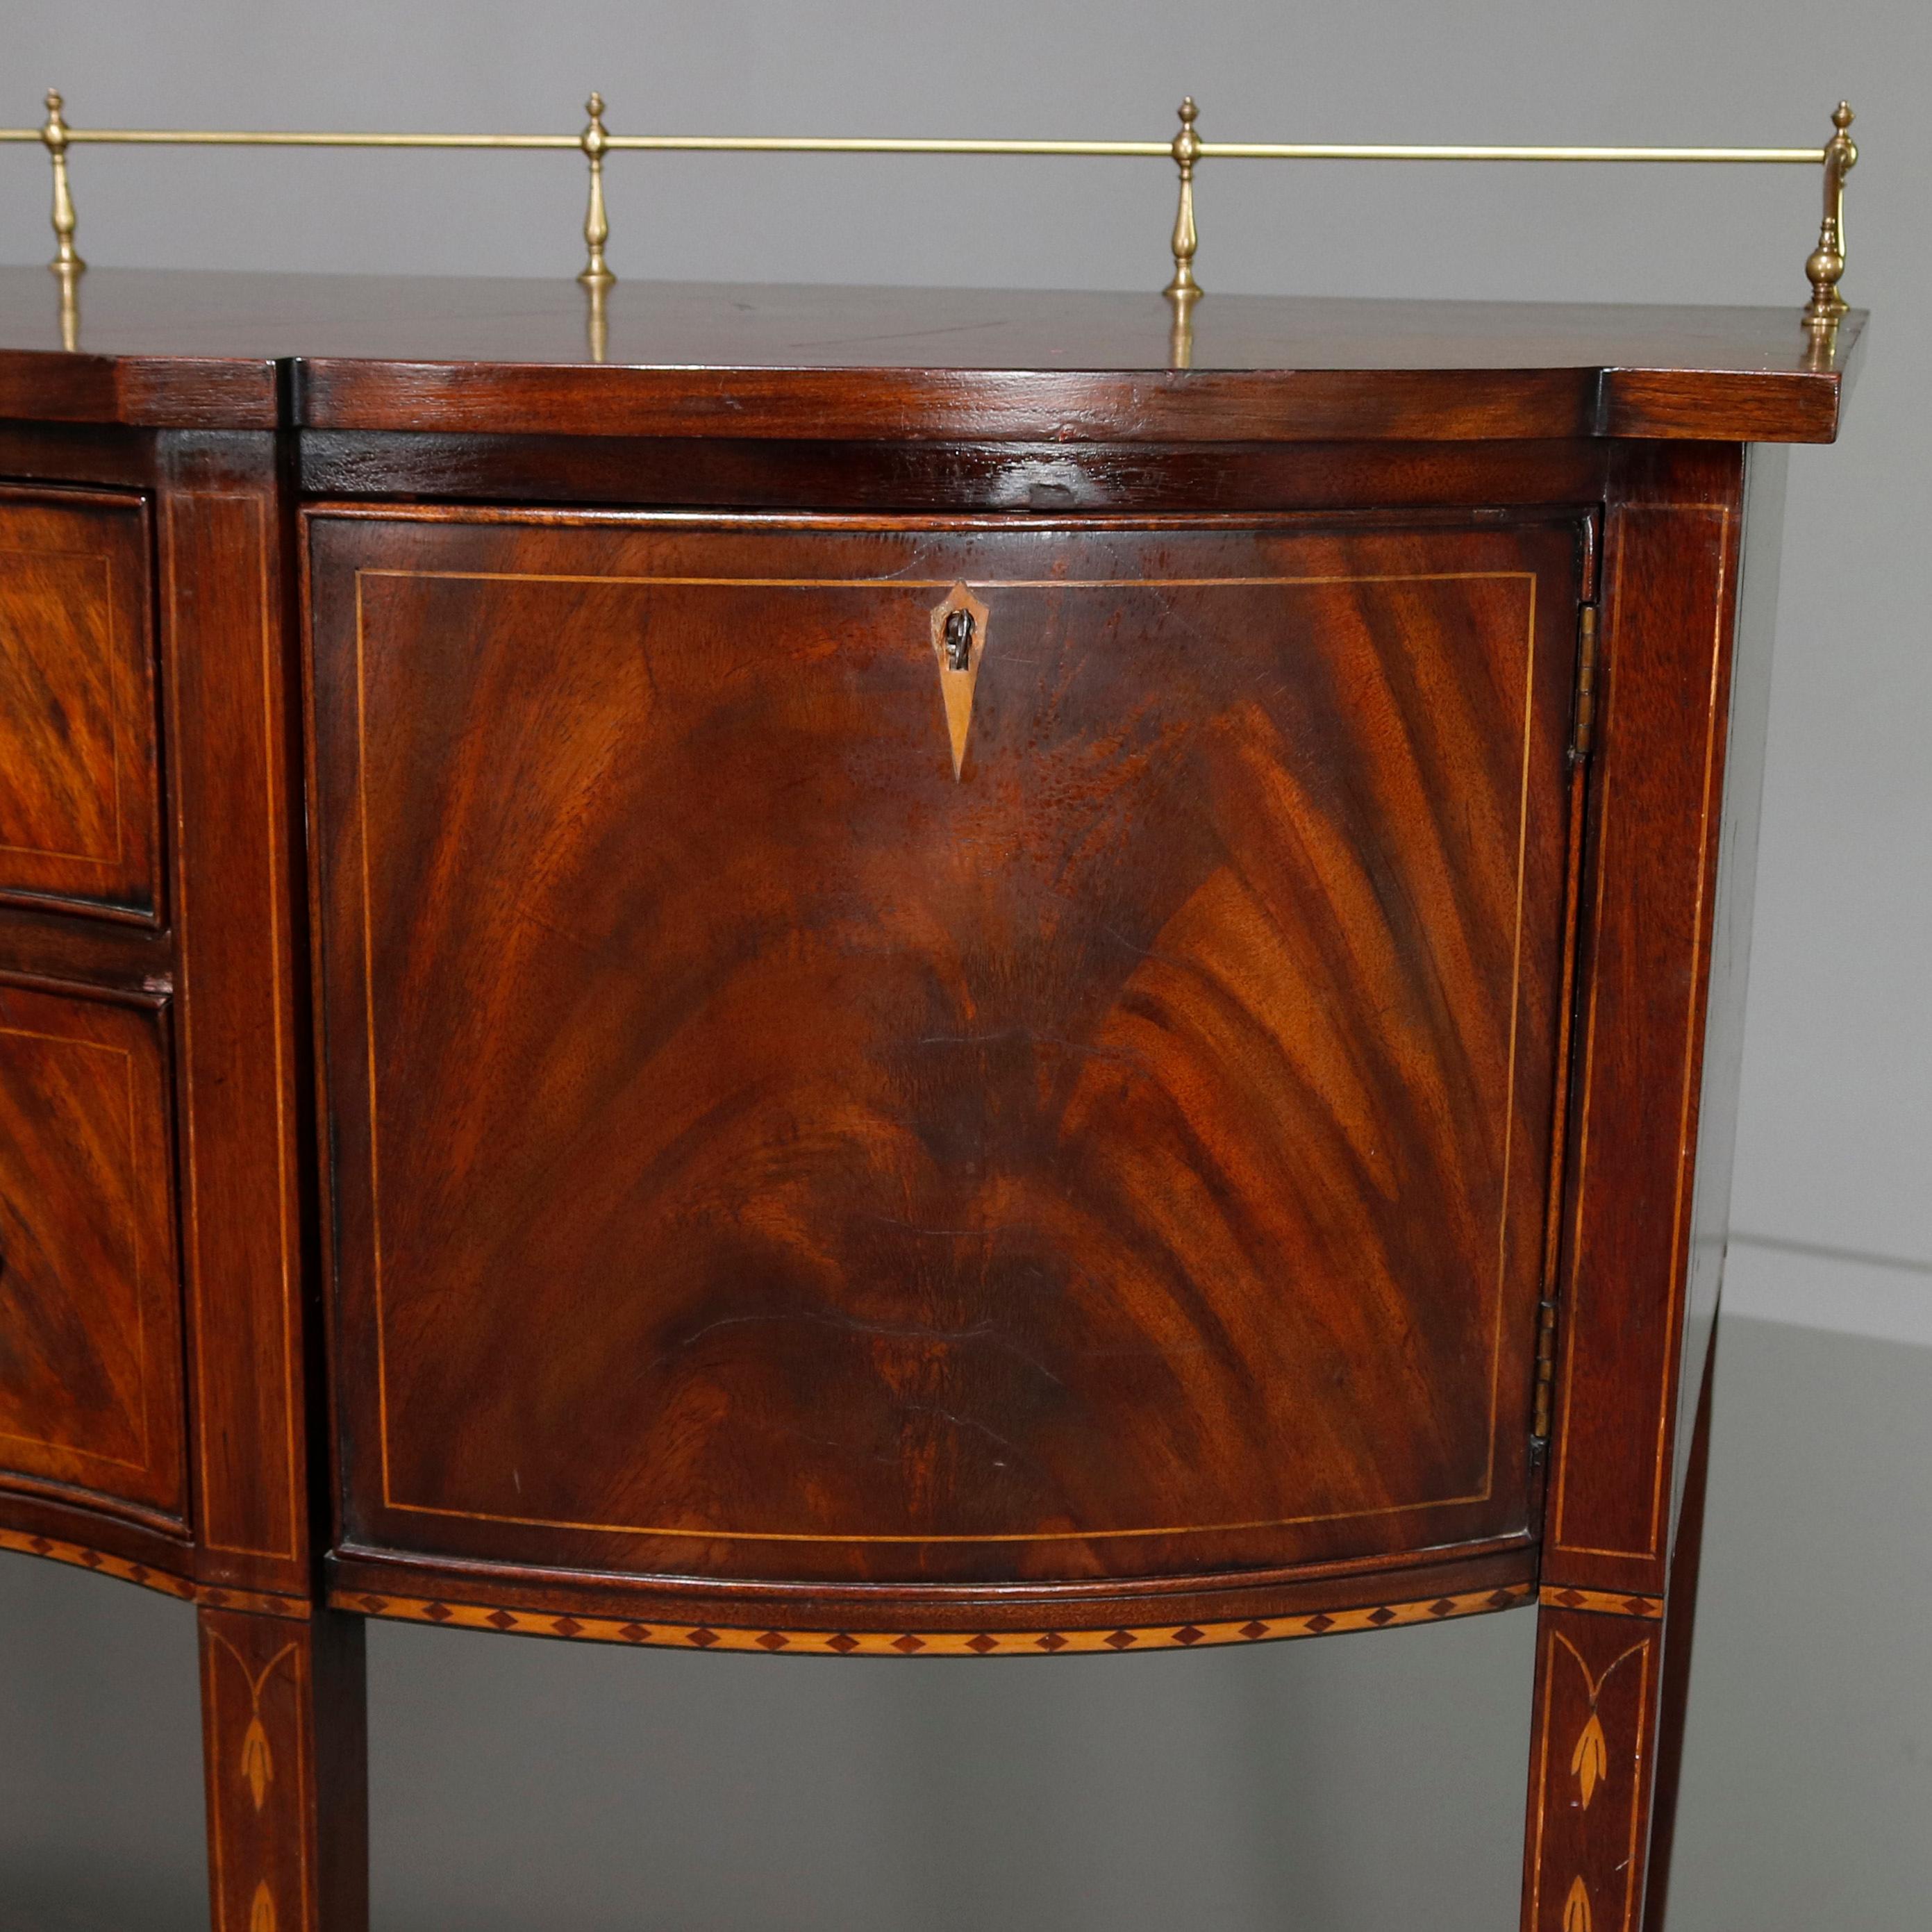 Cast Federal Style Henkel Harris Flame Mahogany Inlaid Sideboard with Brass Rail